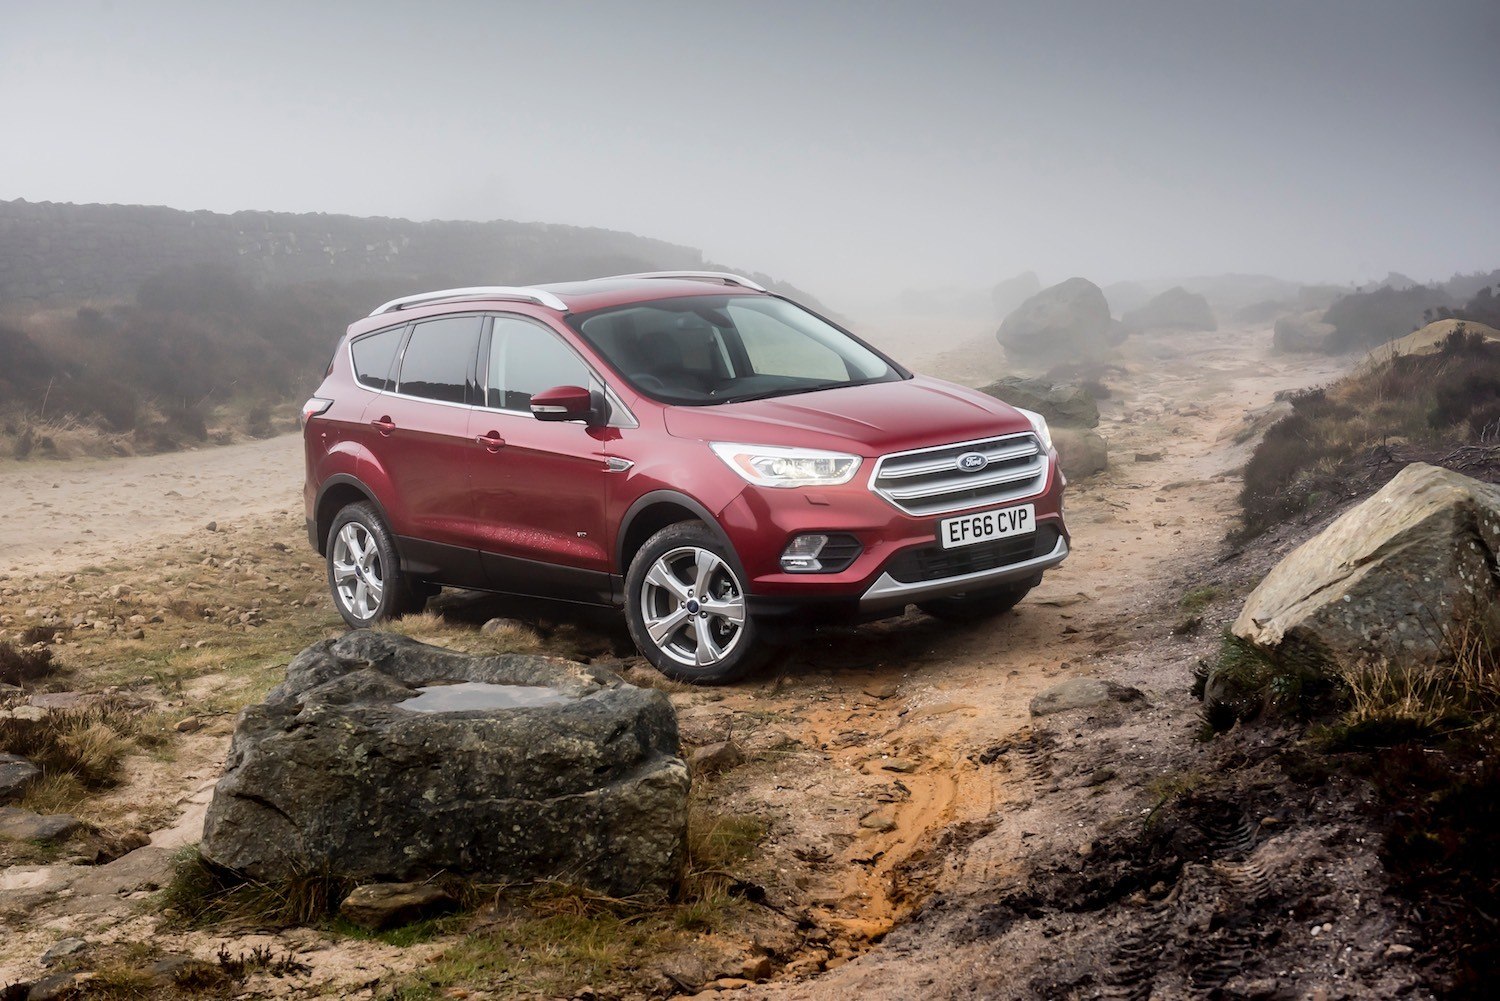 Neil Lyndon lives with the 2017 Ford Kuga Titanium edition 5